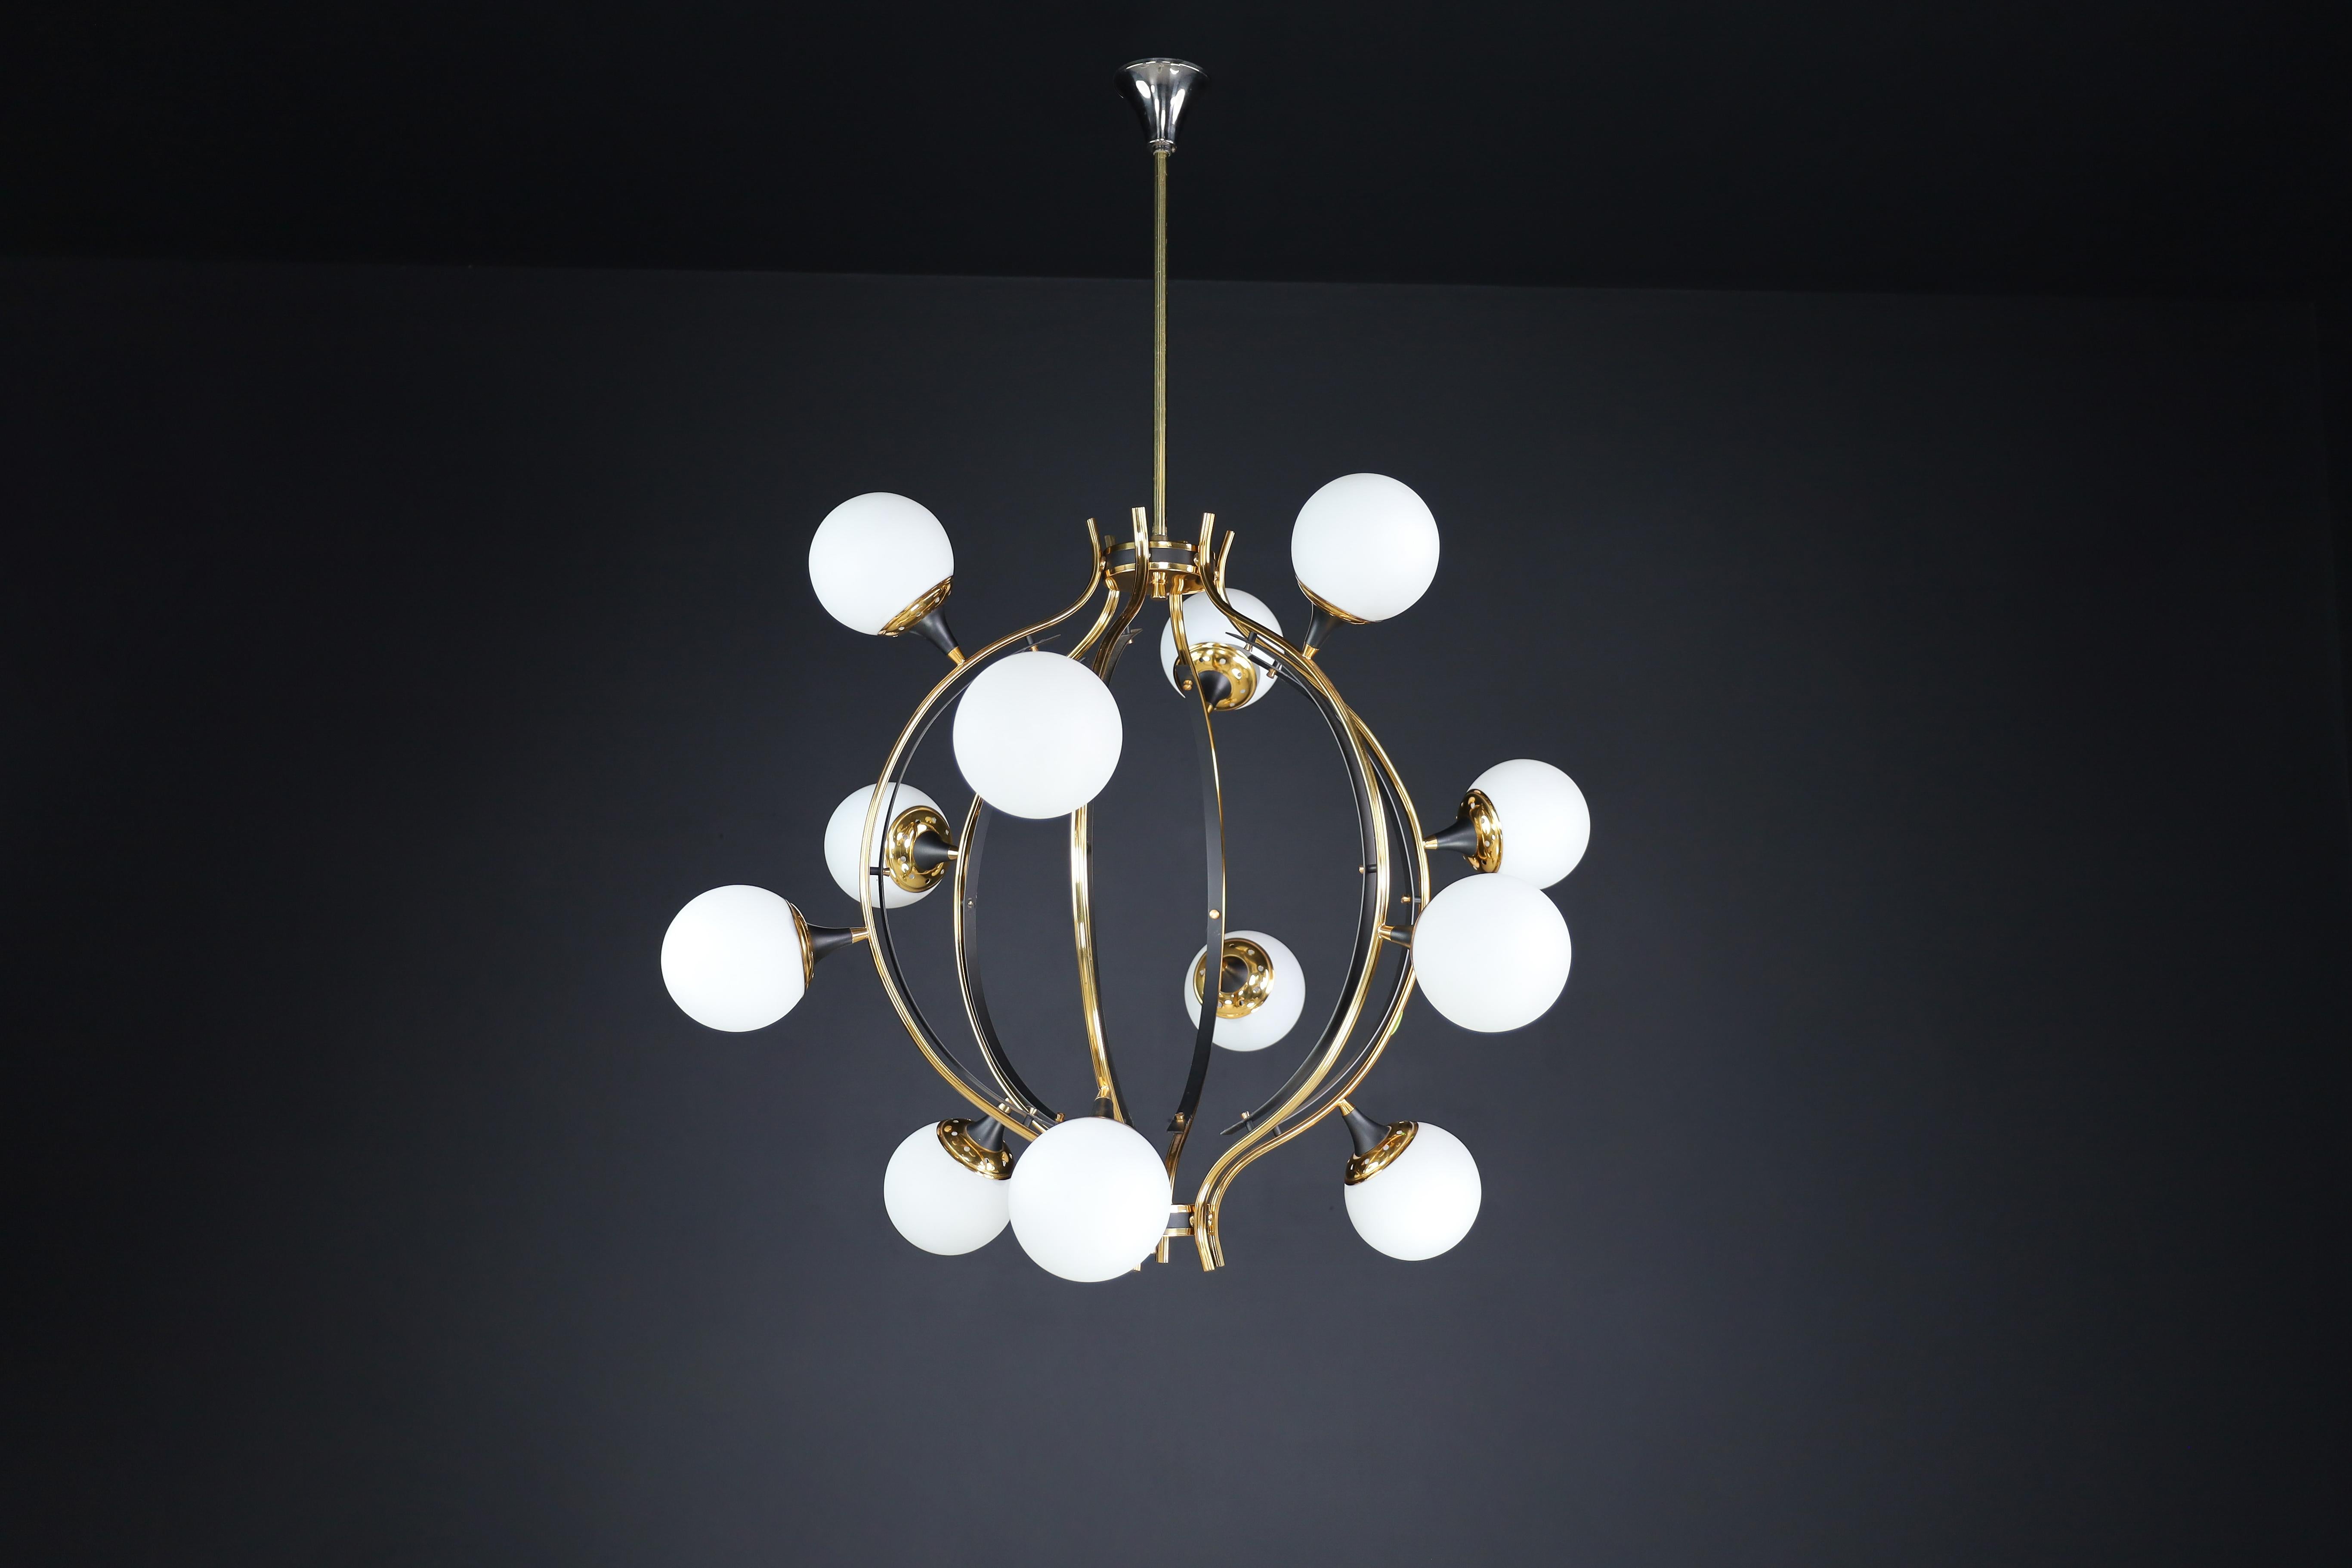 Midcentury Stilnovo Chandelier in Brass and 12 Opaline Globes, Italy 1950s For Sale 4